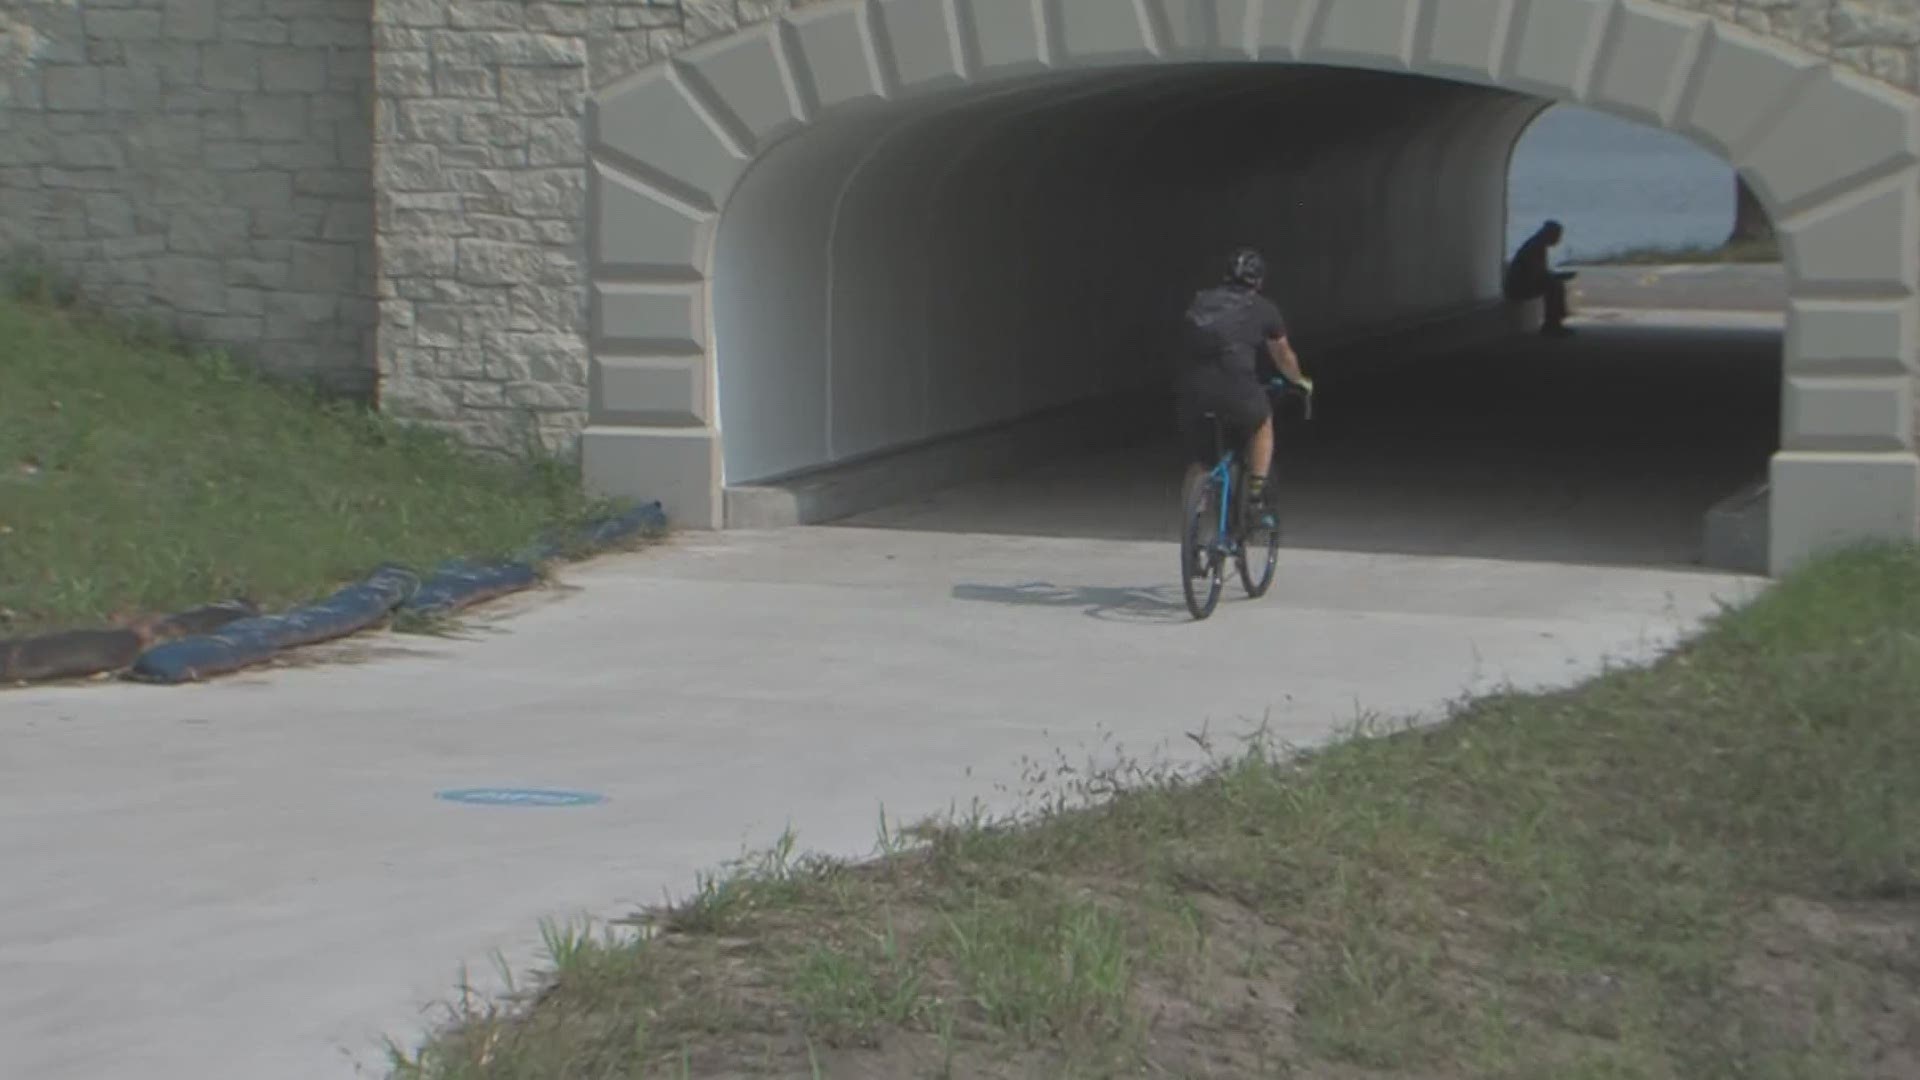 How did the bikers get to the other side of the road? Local 5's Matthew Judy spoke with those using the new foot bridge connecting Gray's Lake and Water Works Park.